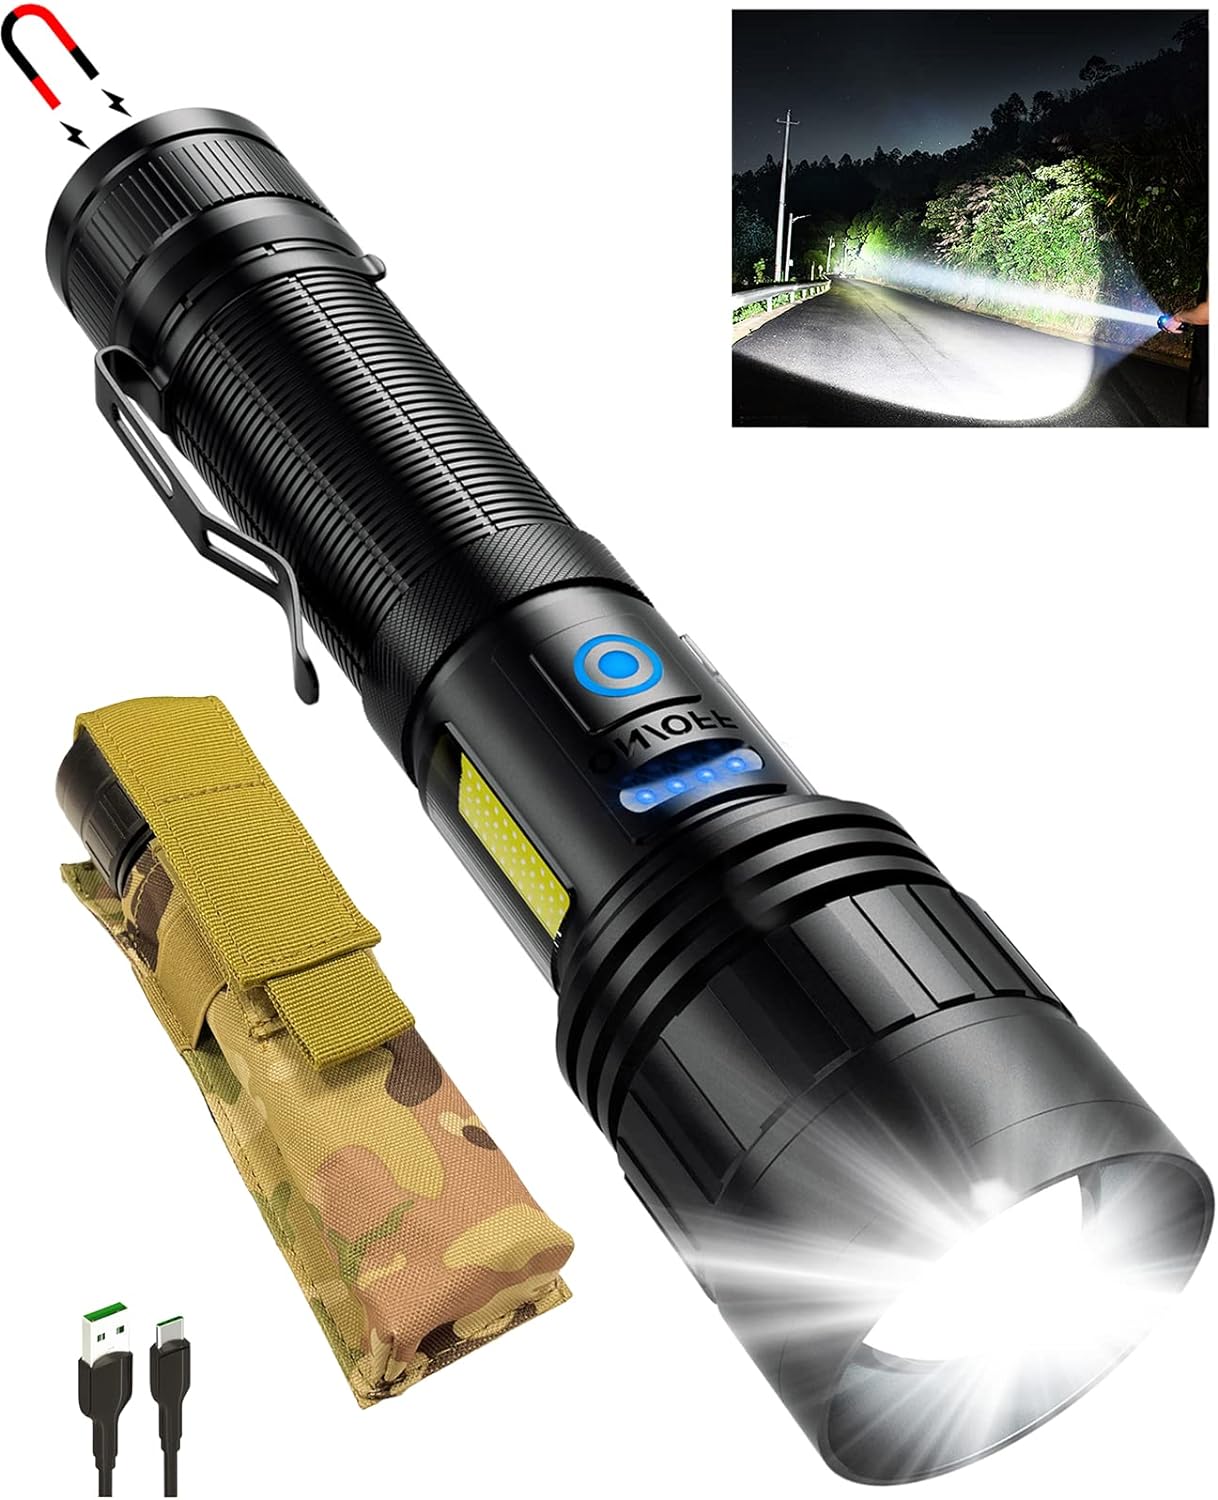 BERCOL Rechargeable LED Flashlights High Lumen -  120000 Lumens Super Brightest Flash Lights, High Powered Torch ,6 Modes with 2 Cob L